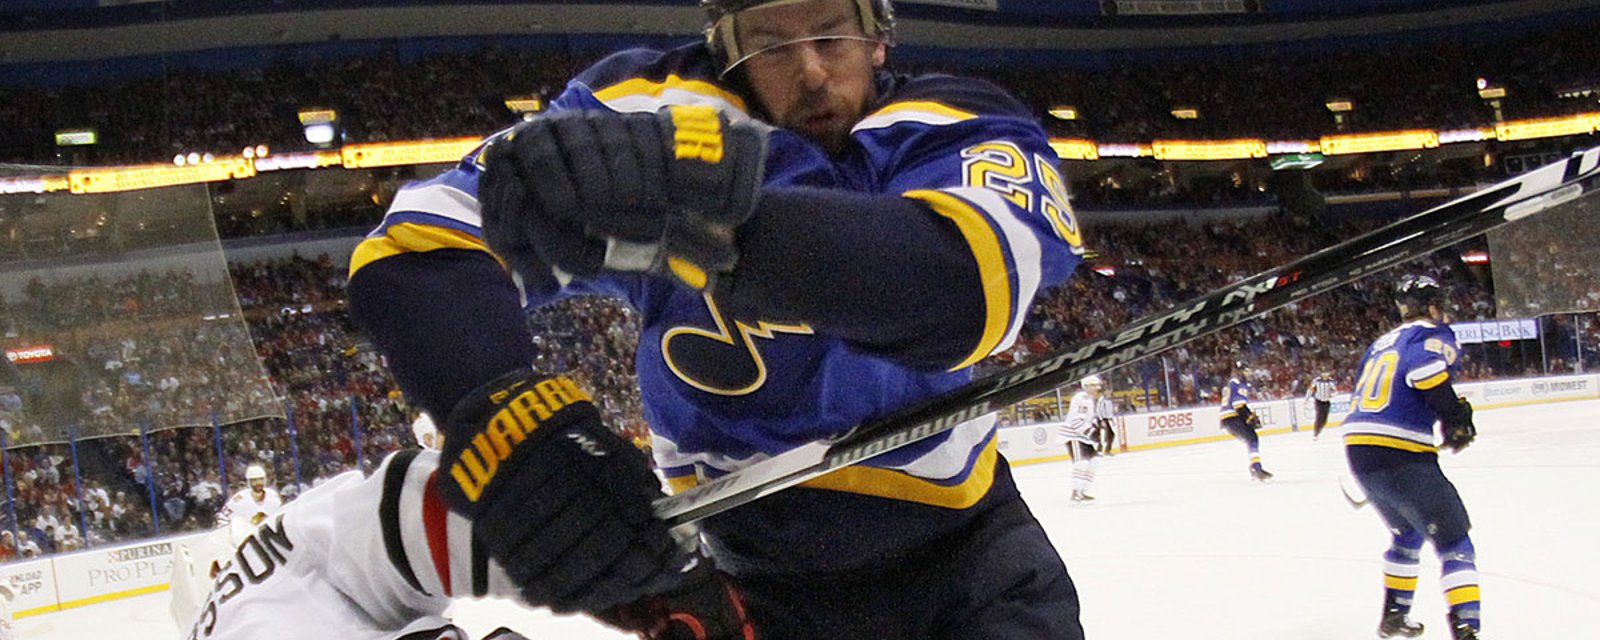 Veteran D-man retires after spending last season with Cup champions Blues